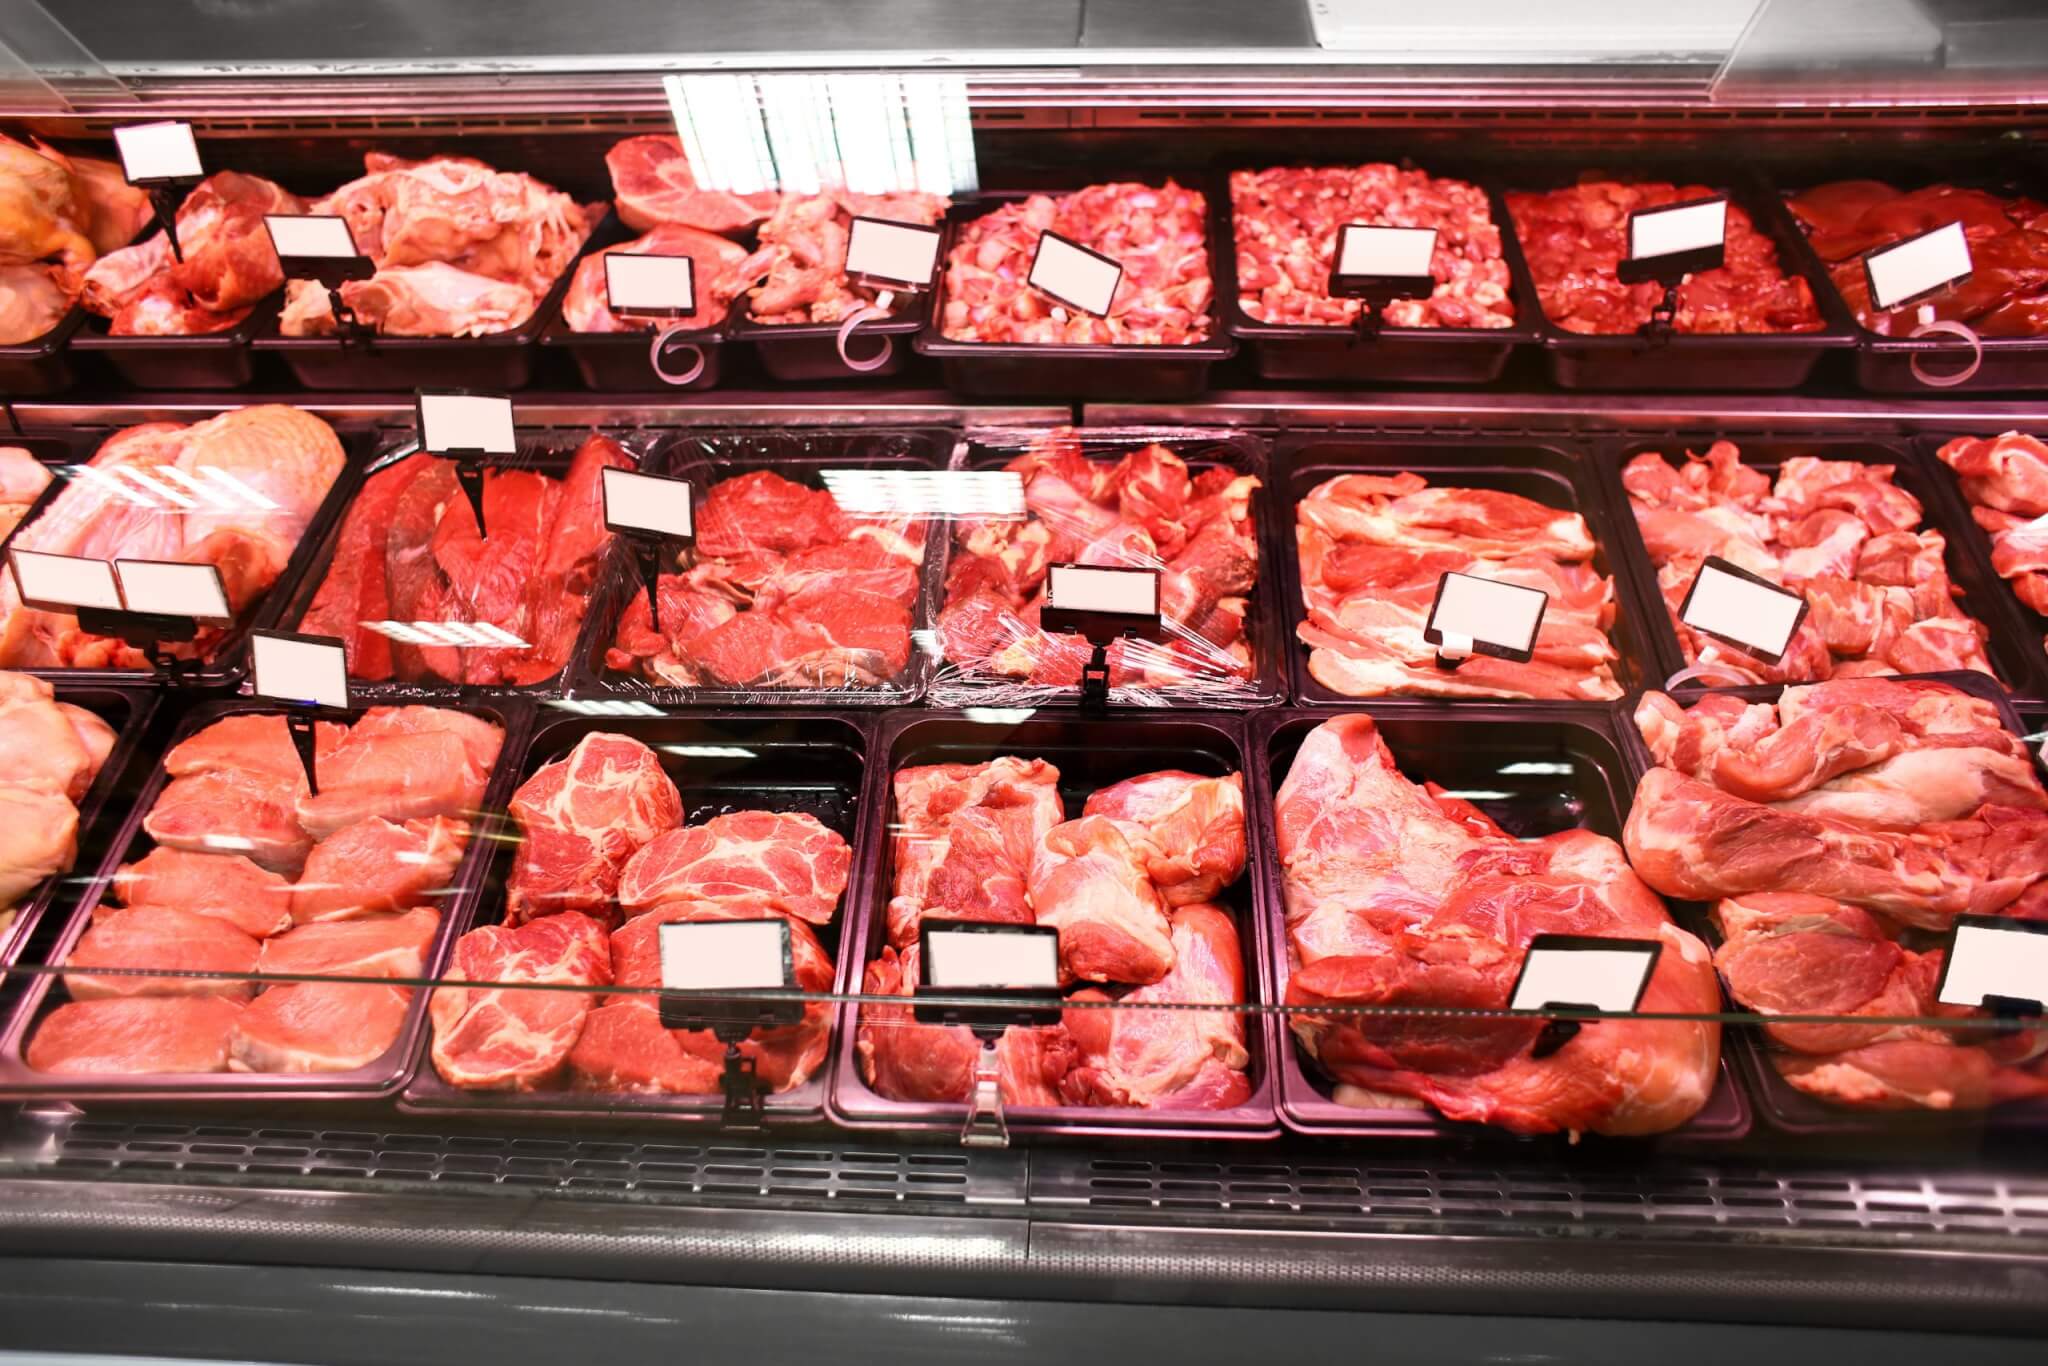 Refrigerated display case with fresh meat in supermarket.